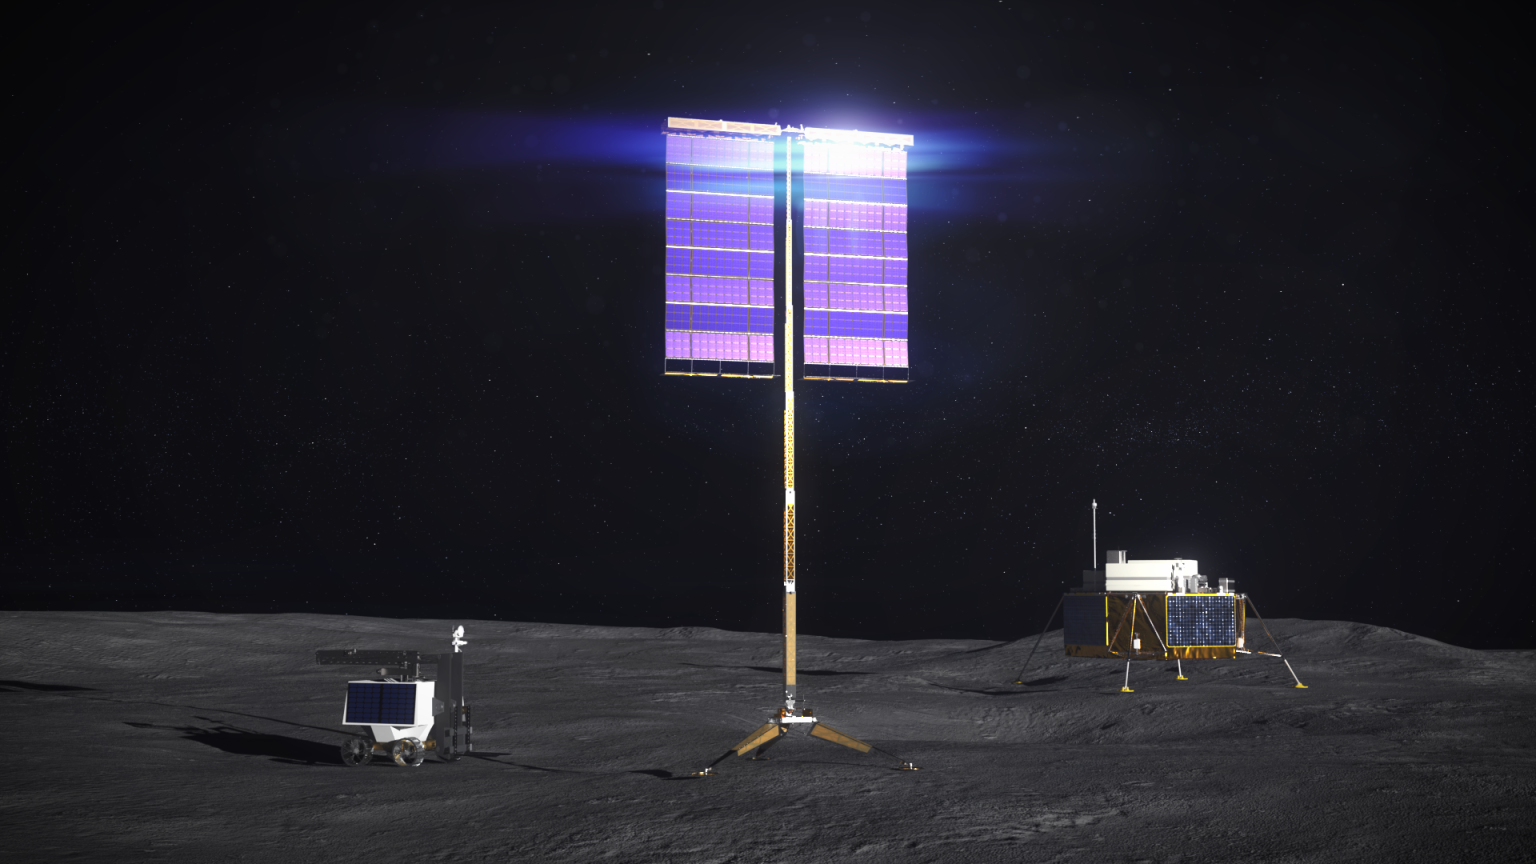 Vertical solar arrays, pictured in this illustration, will help power exploration of the Moon under Artemis.